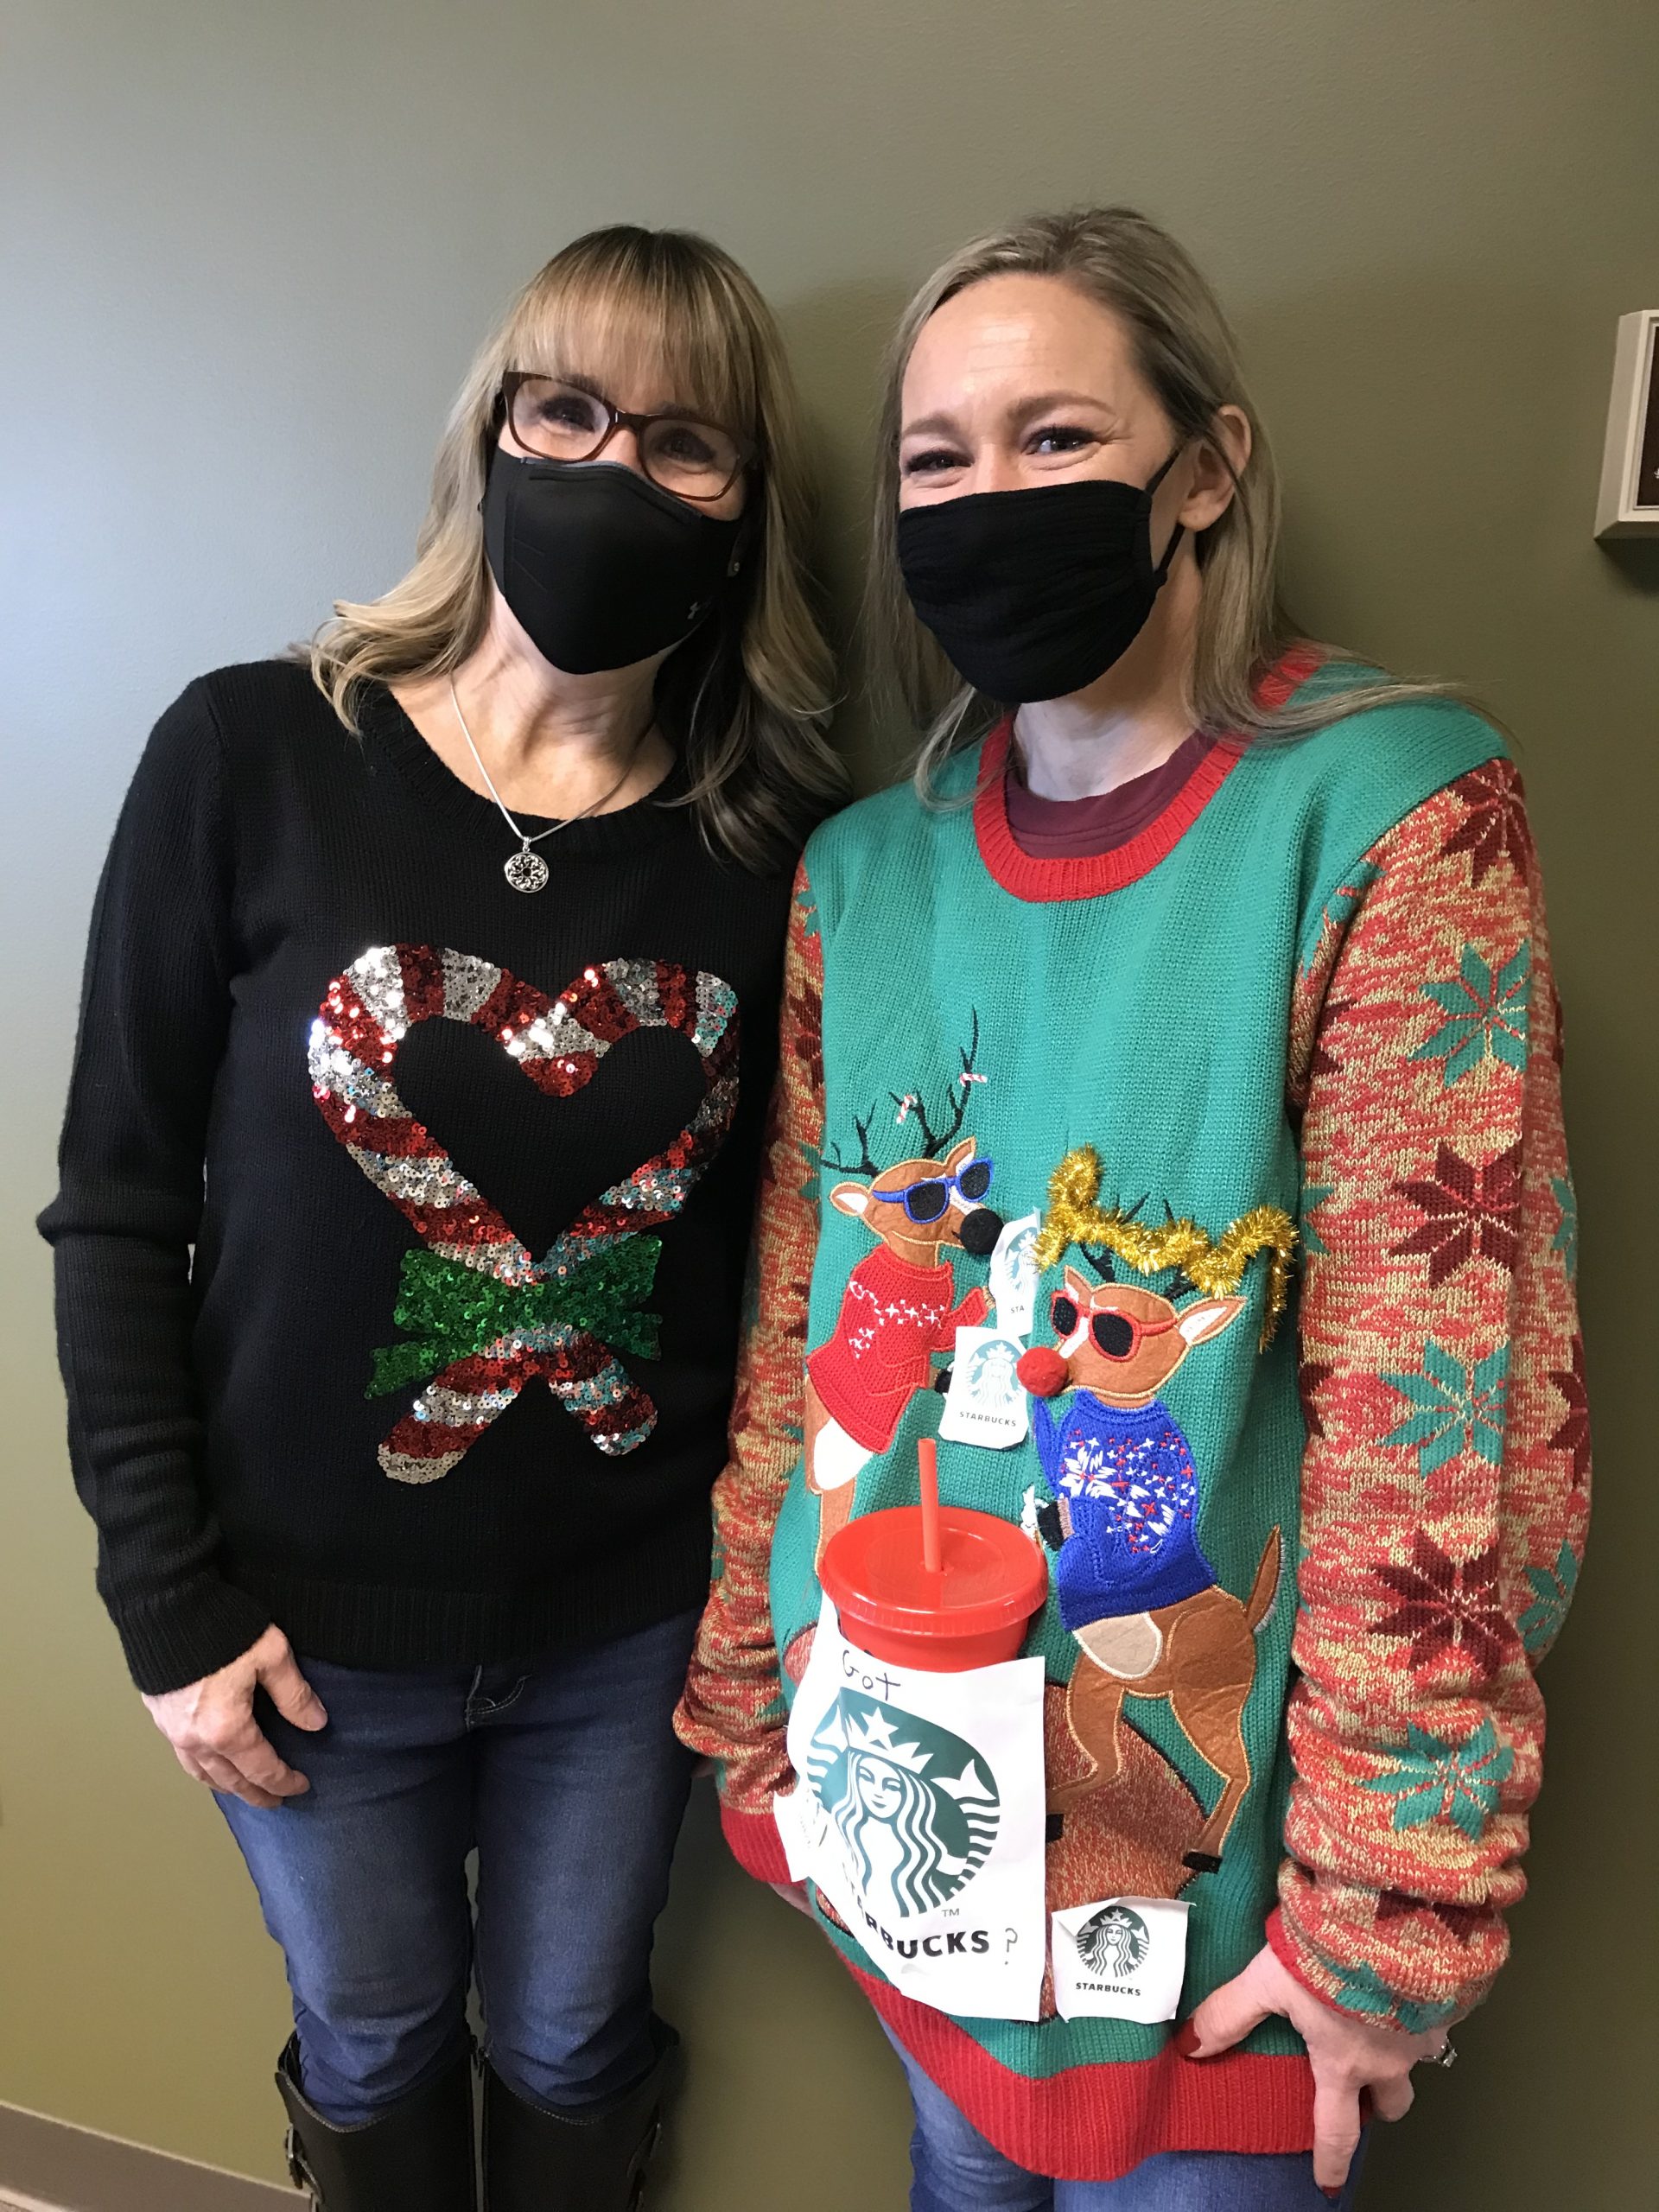 2 women in holiday sweaters